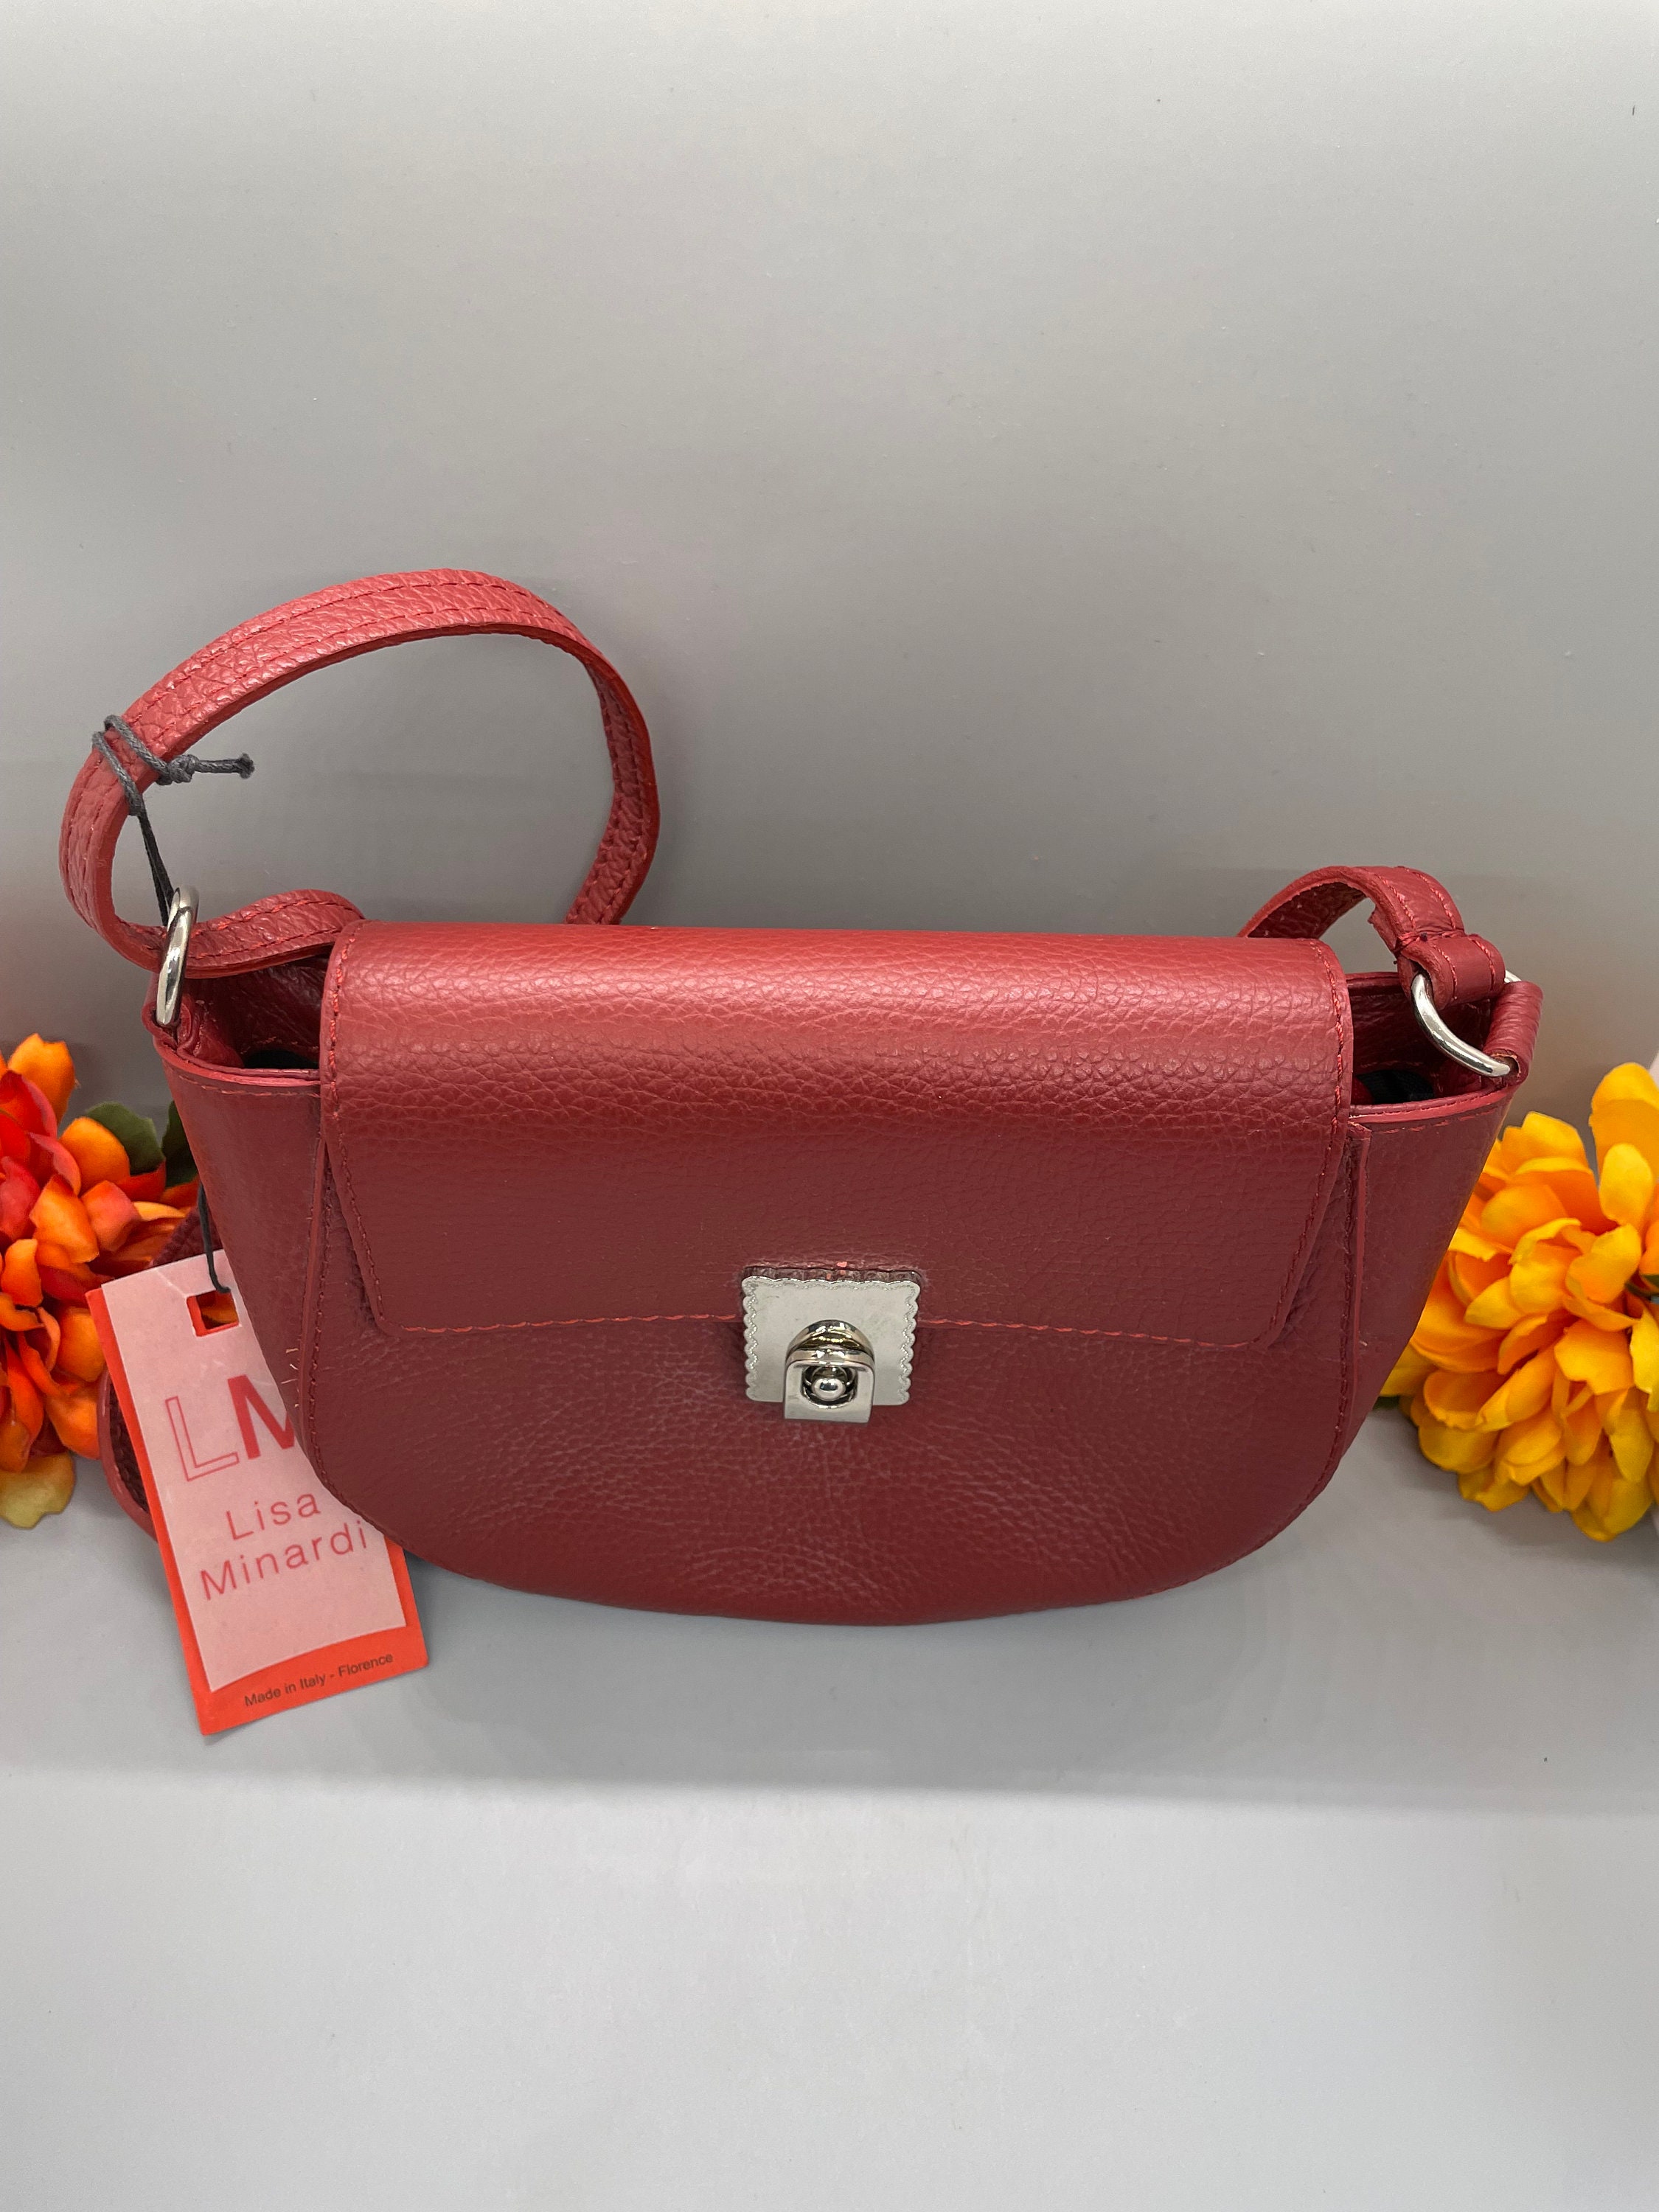 NWT Lisa Minardi Made in Italy Red Leather Purse - Etsy